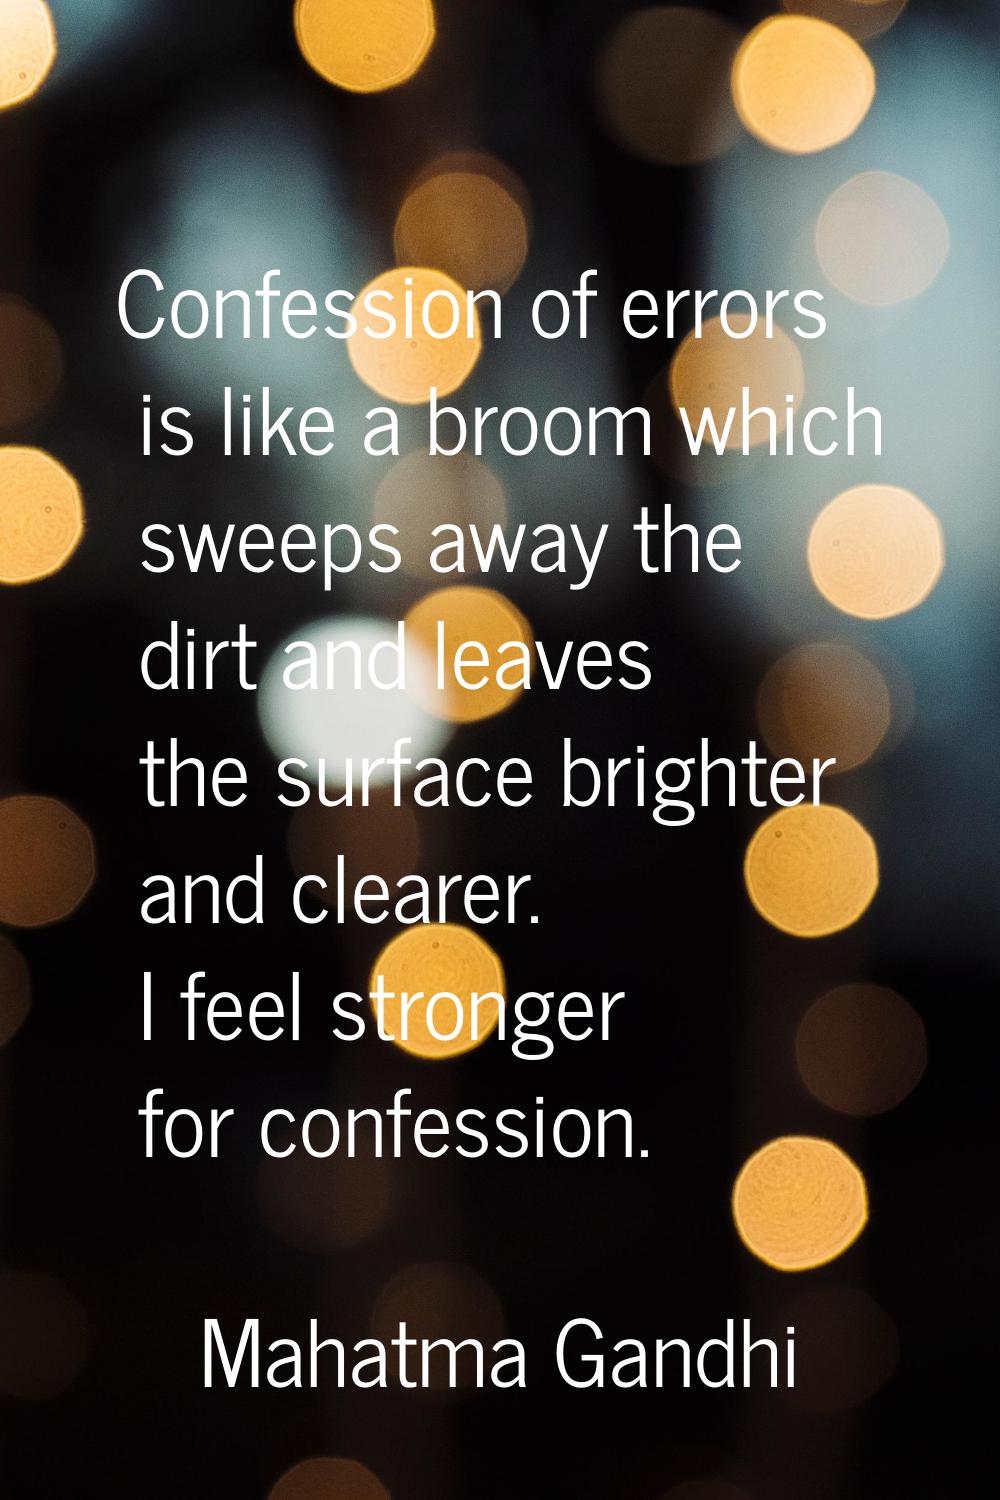 Confession of errors is like a broom which sweeps away the dirt and leaves the surface brighter and